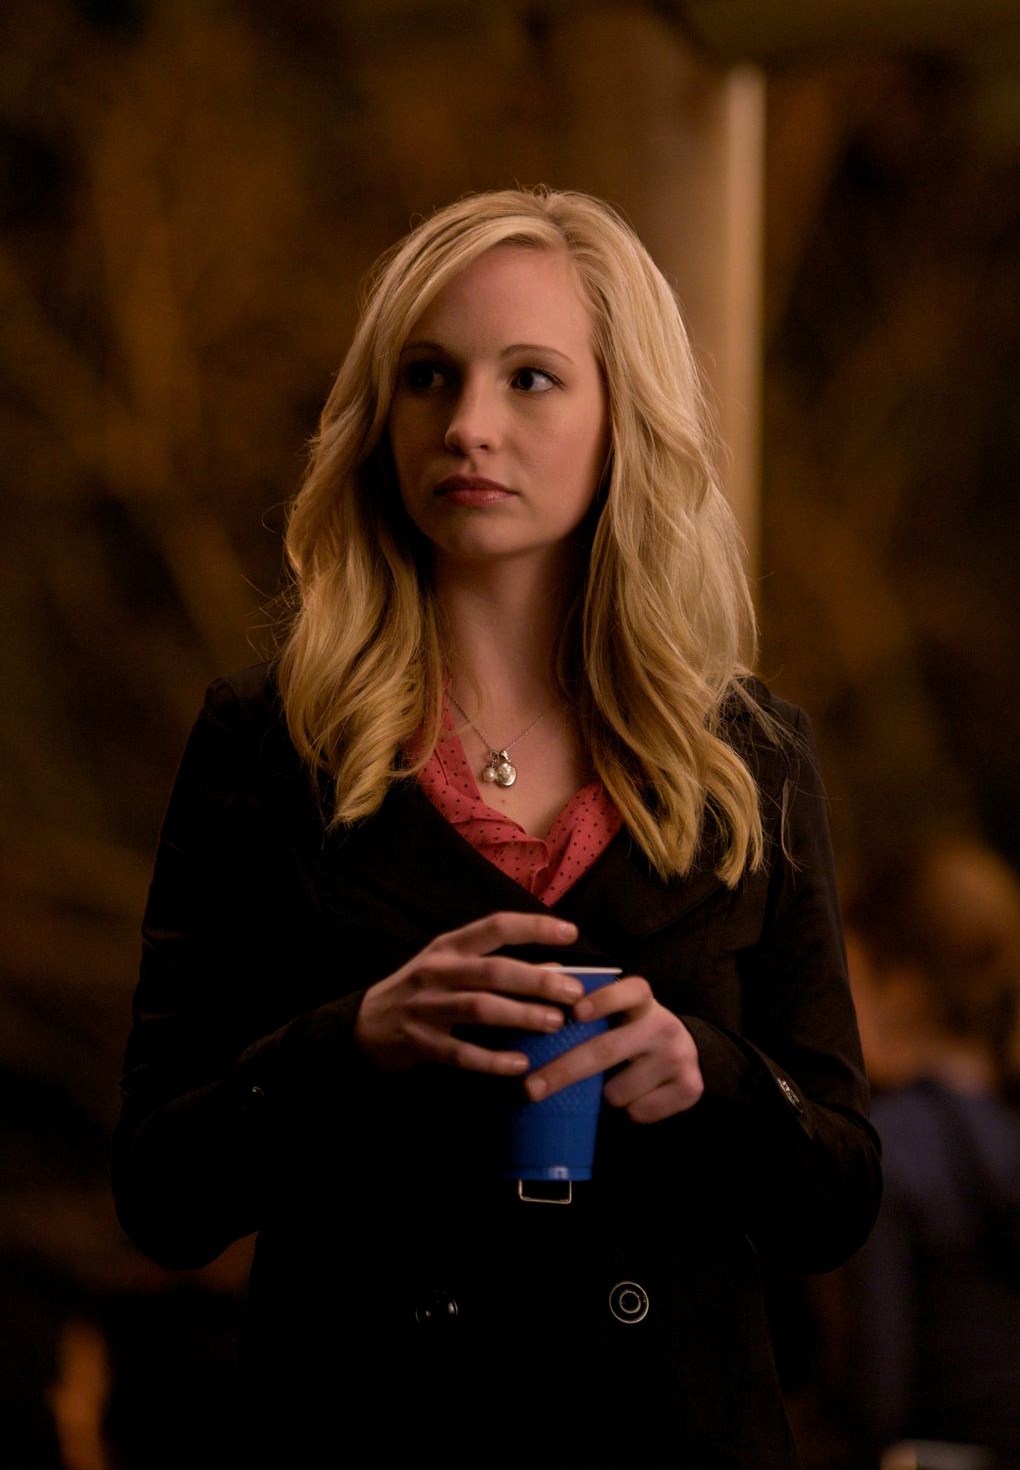 Candice Accola photo 4 of 351 pics, wallpaper - photo #301687 - ThePlace2